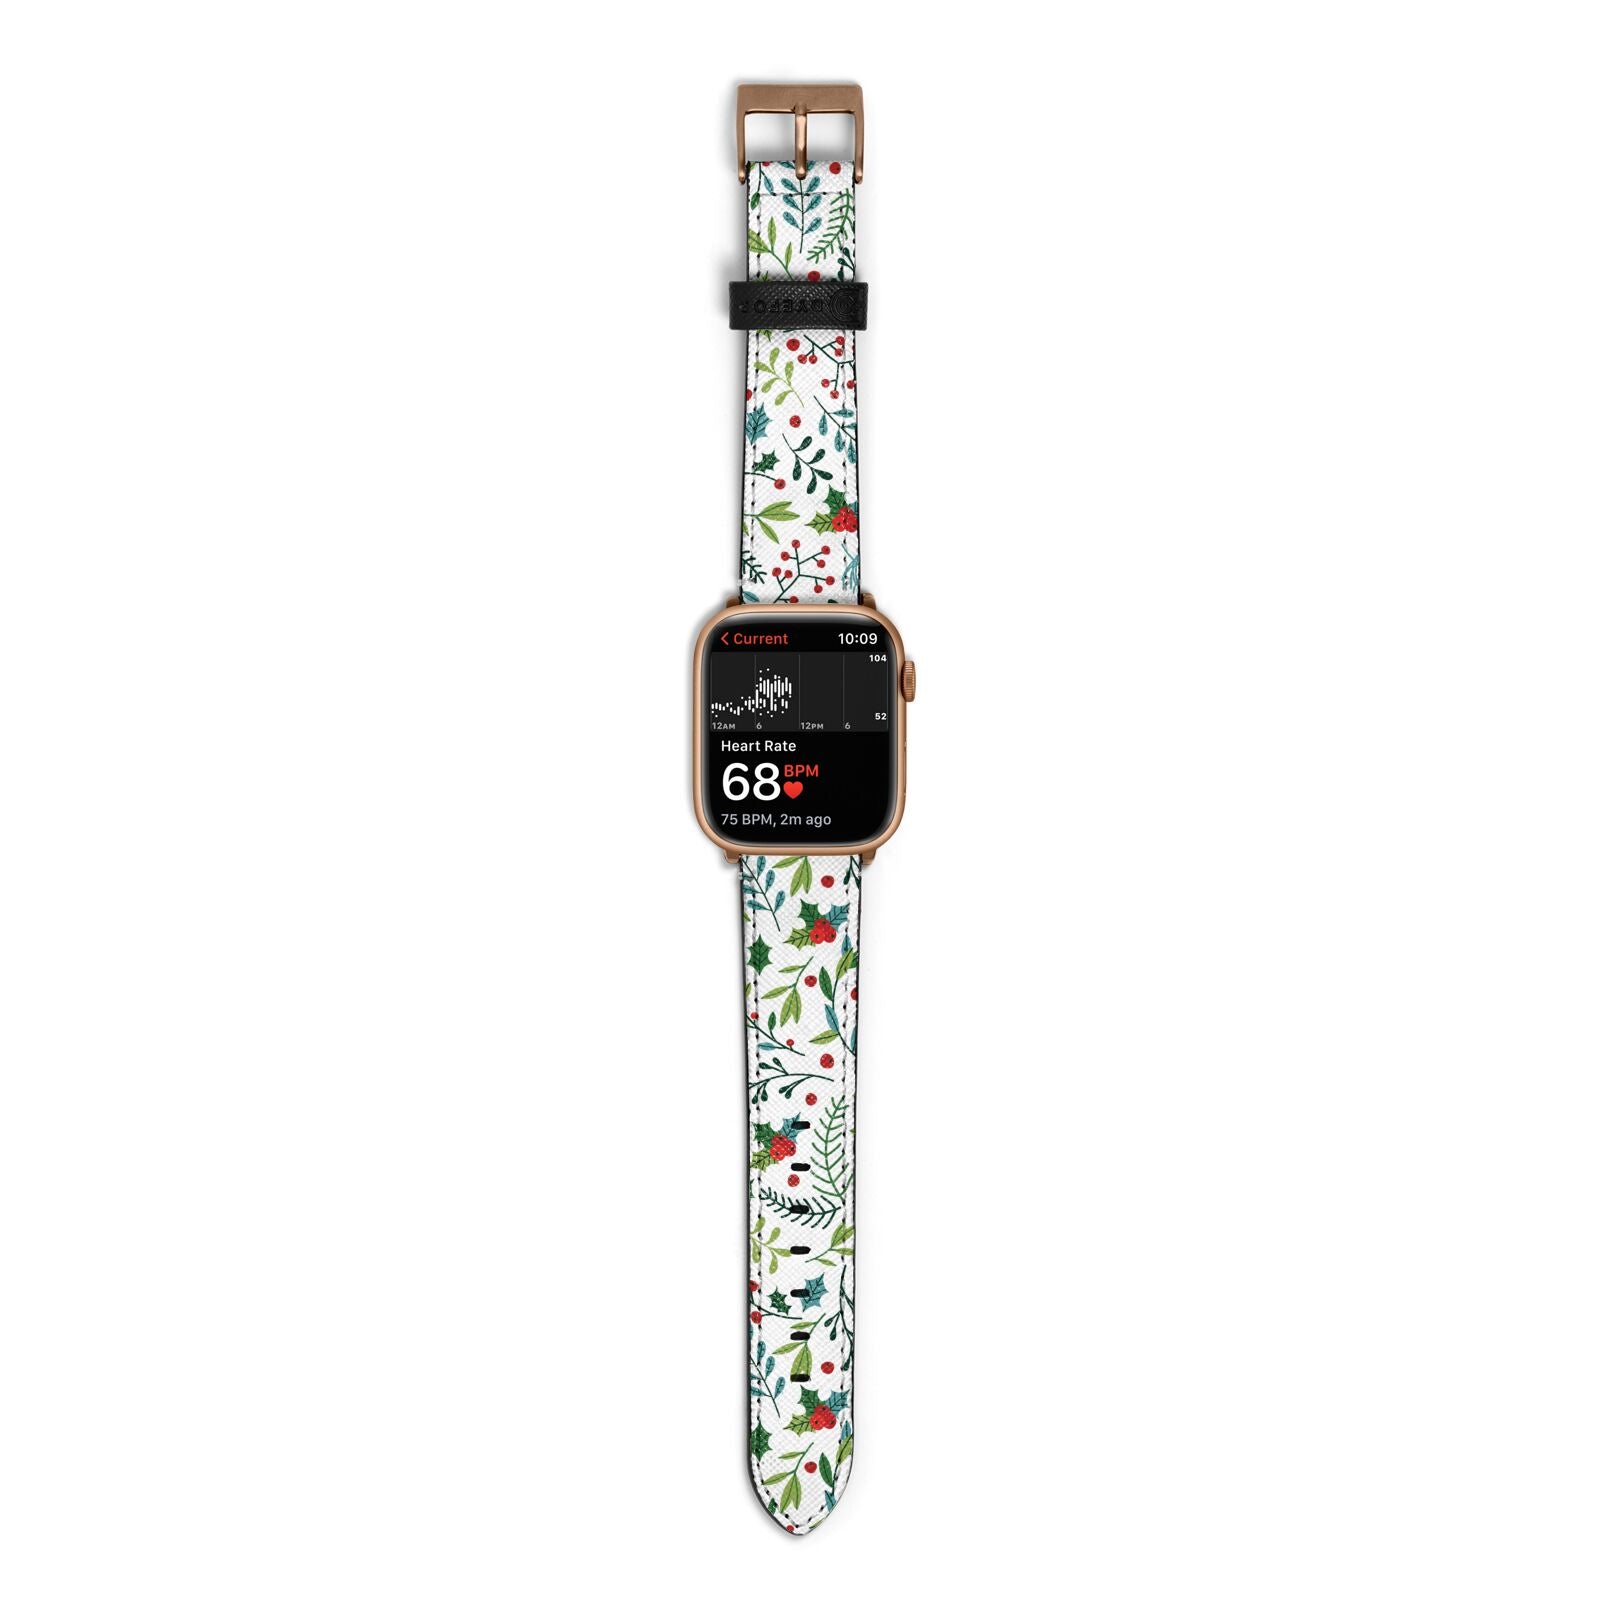 Winter Floral Apple Watch Strap Size 38mm with Gold Hardware